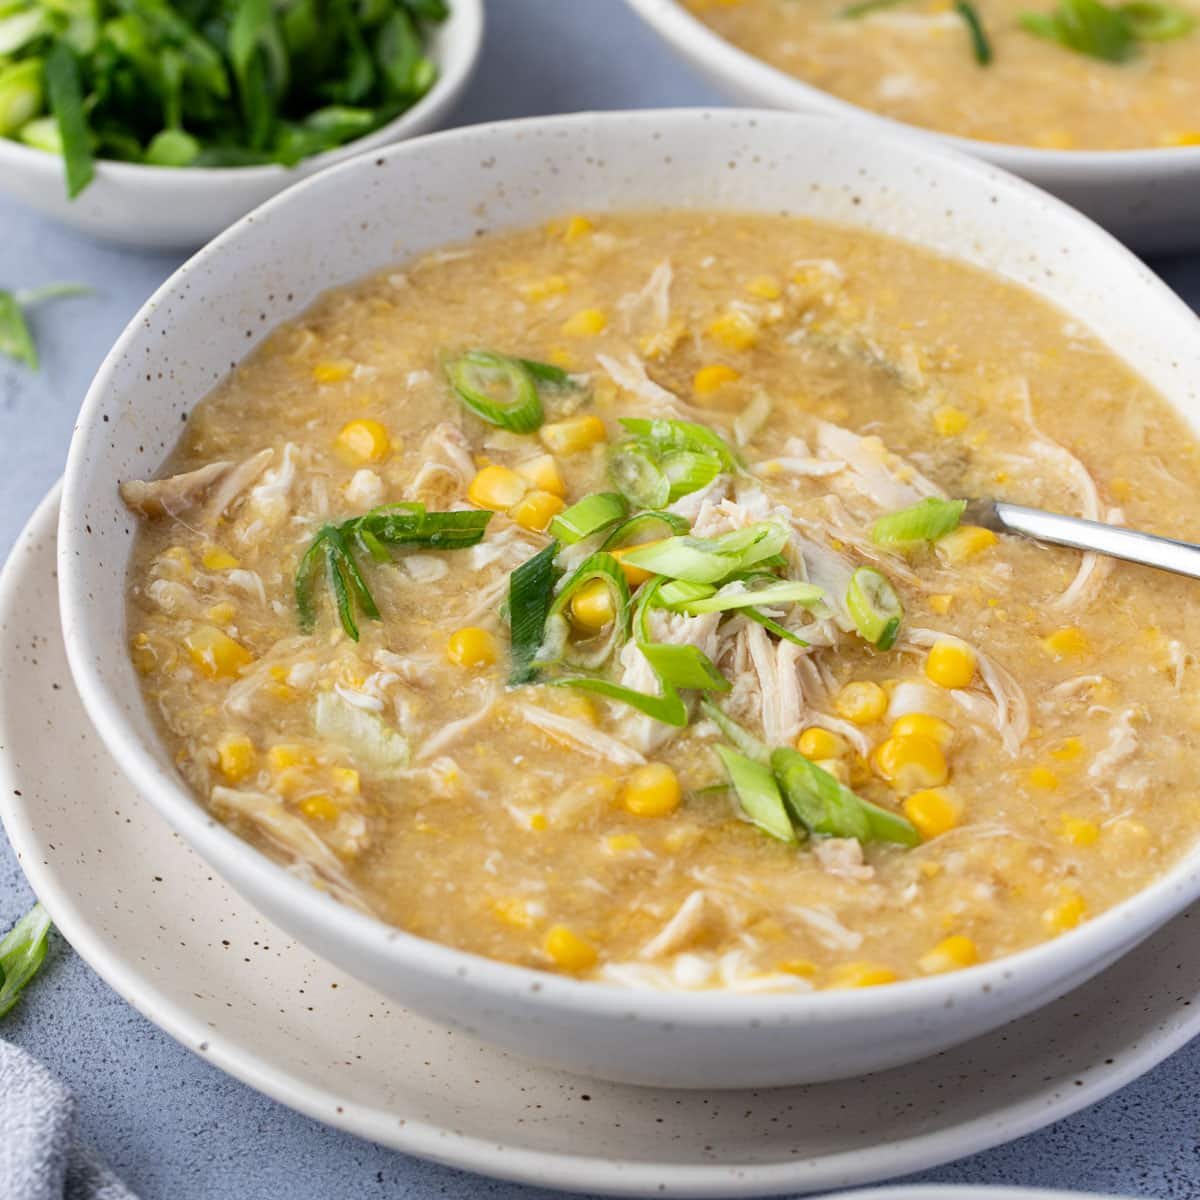 https://www.thecookingcollective.com.au/wp-content/uploads/2022/08/chicken-and-corn-soup-3.jpg